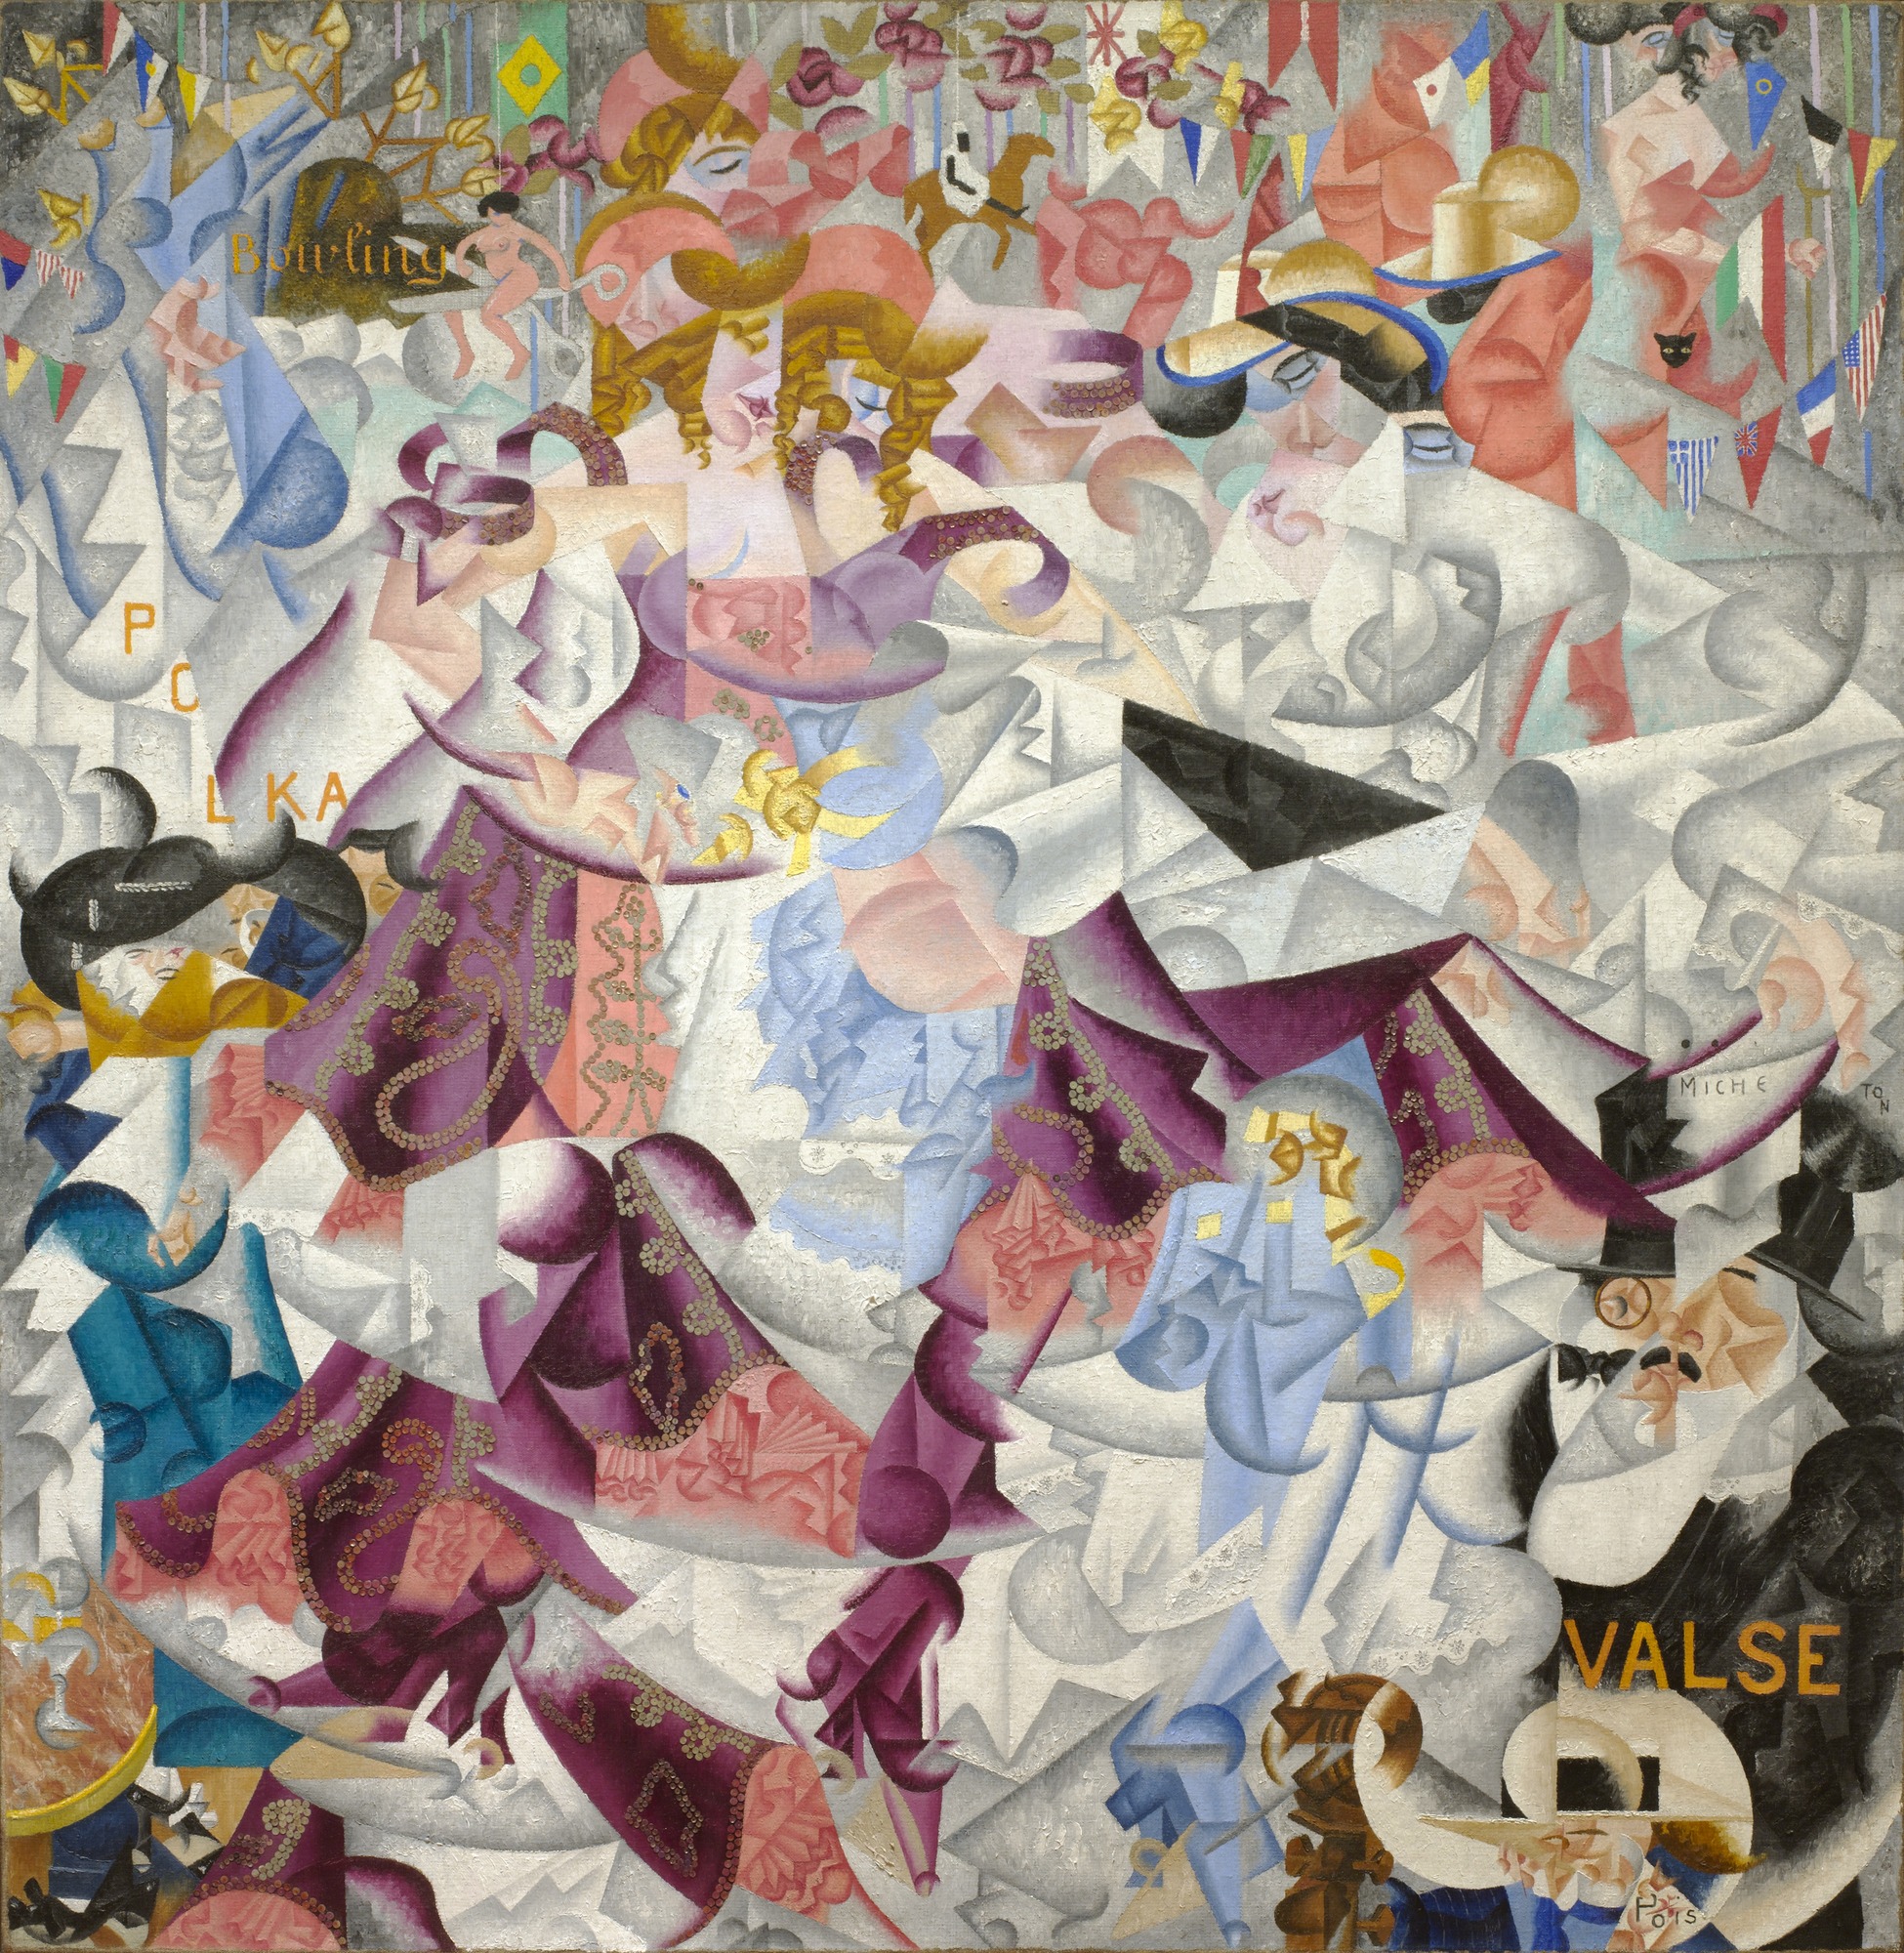 Gino Severini, Dynamic Hieroglyph of the Bal Tabarin, 1912, oil and sequins on canvas, 161.6 x 156.2 cm (MoMA)